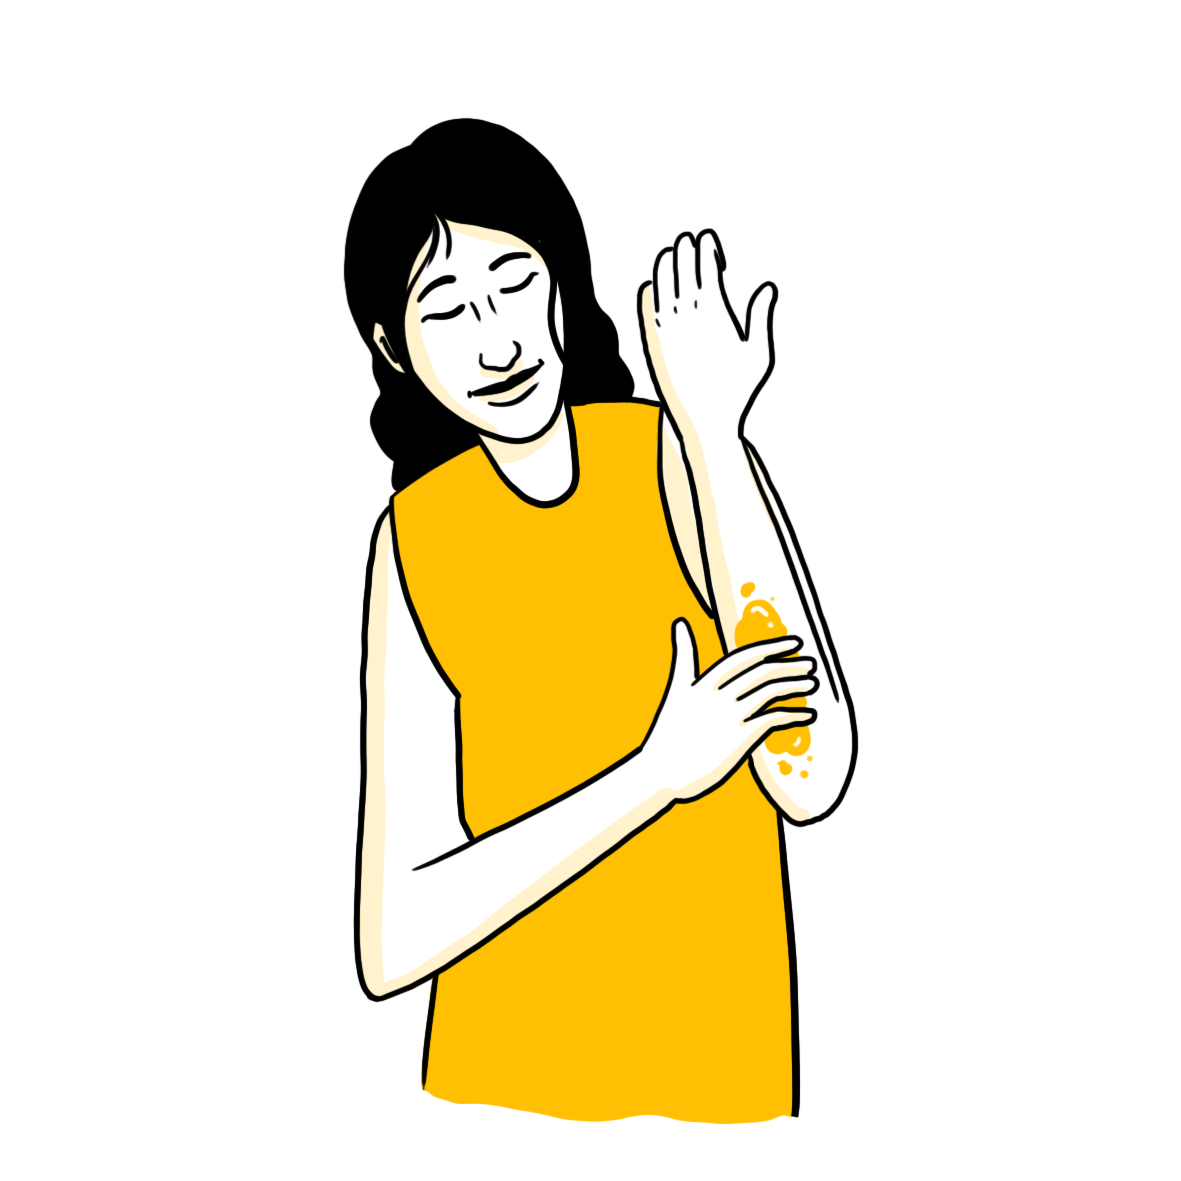 Woman rubbing cream into her forearm, smiling. 